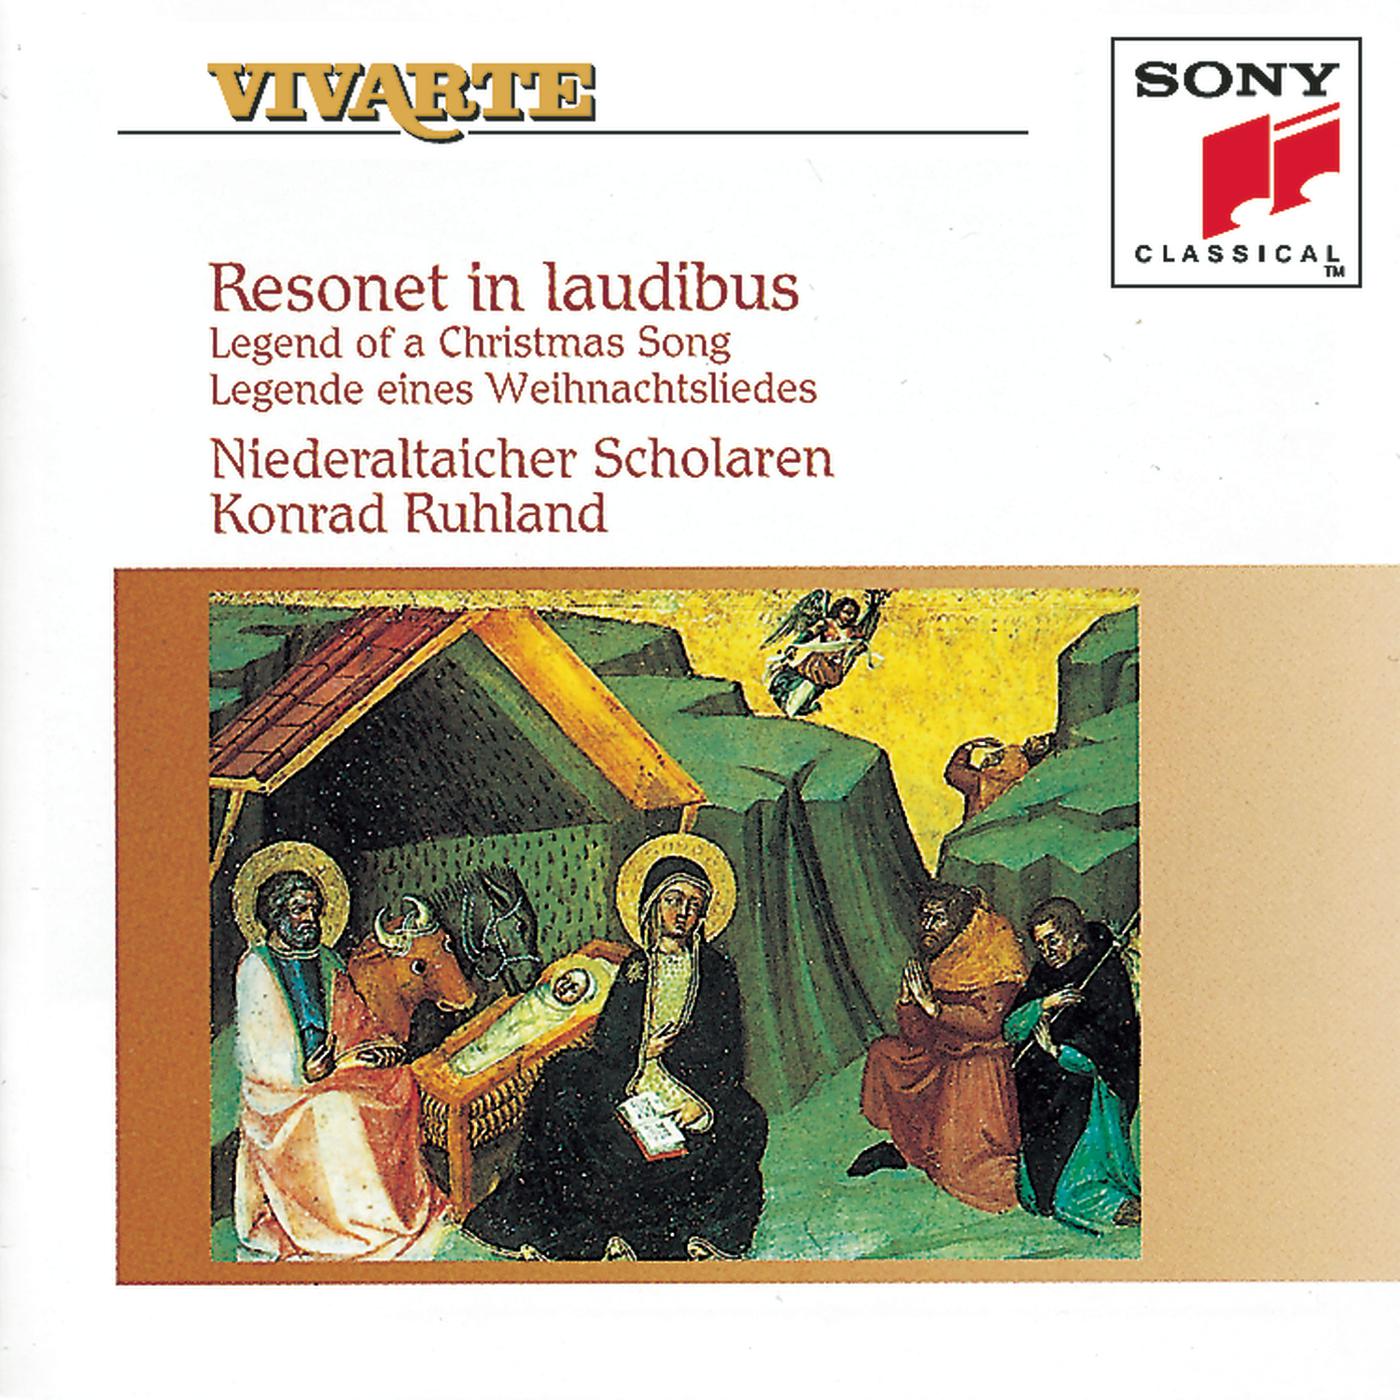 Resonet in laudibus - Legend of a Christmas Song